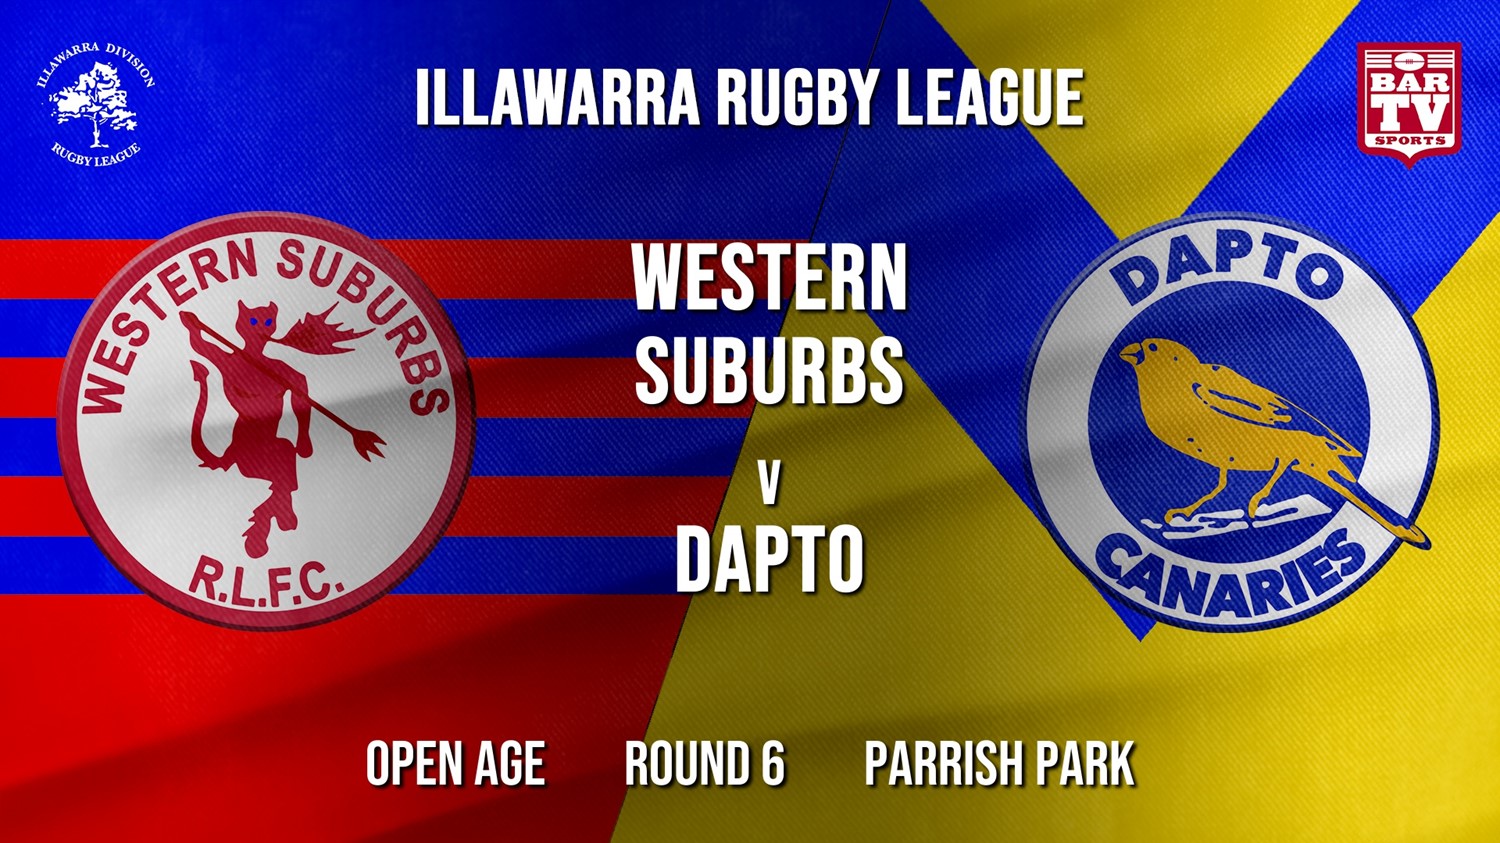 IRL Round 6 - Open Age - Western Suburbs Devils v Dapto Canaries Minigame Slate Image